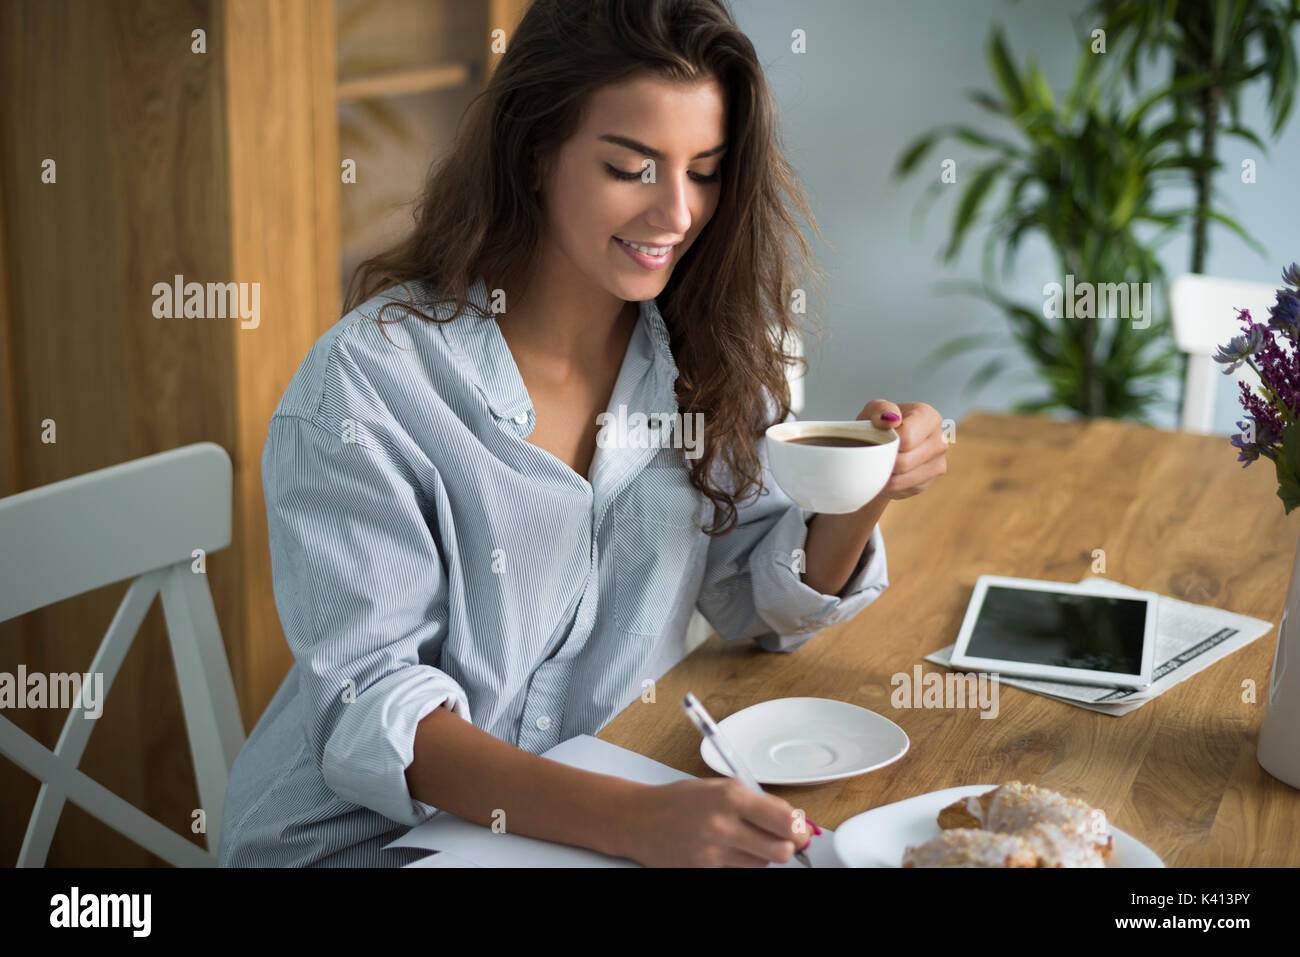 She is always a hardworker, even in the morning Stock Photo